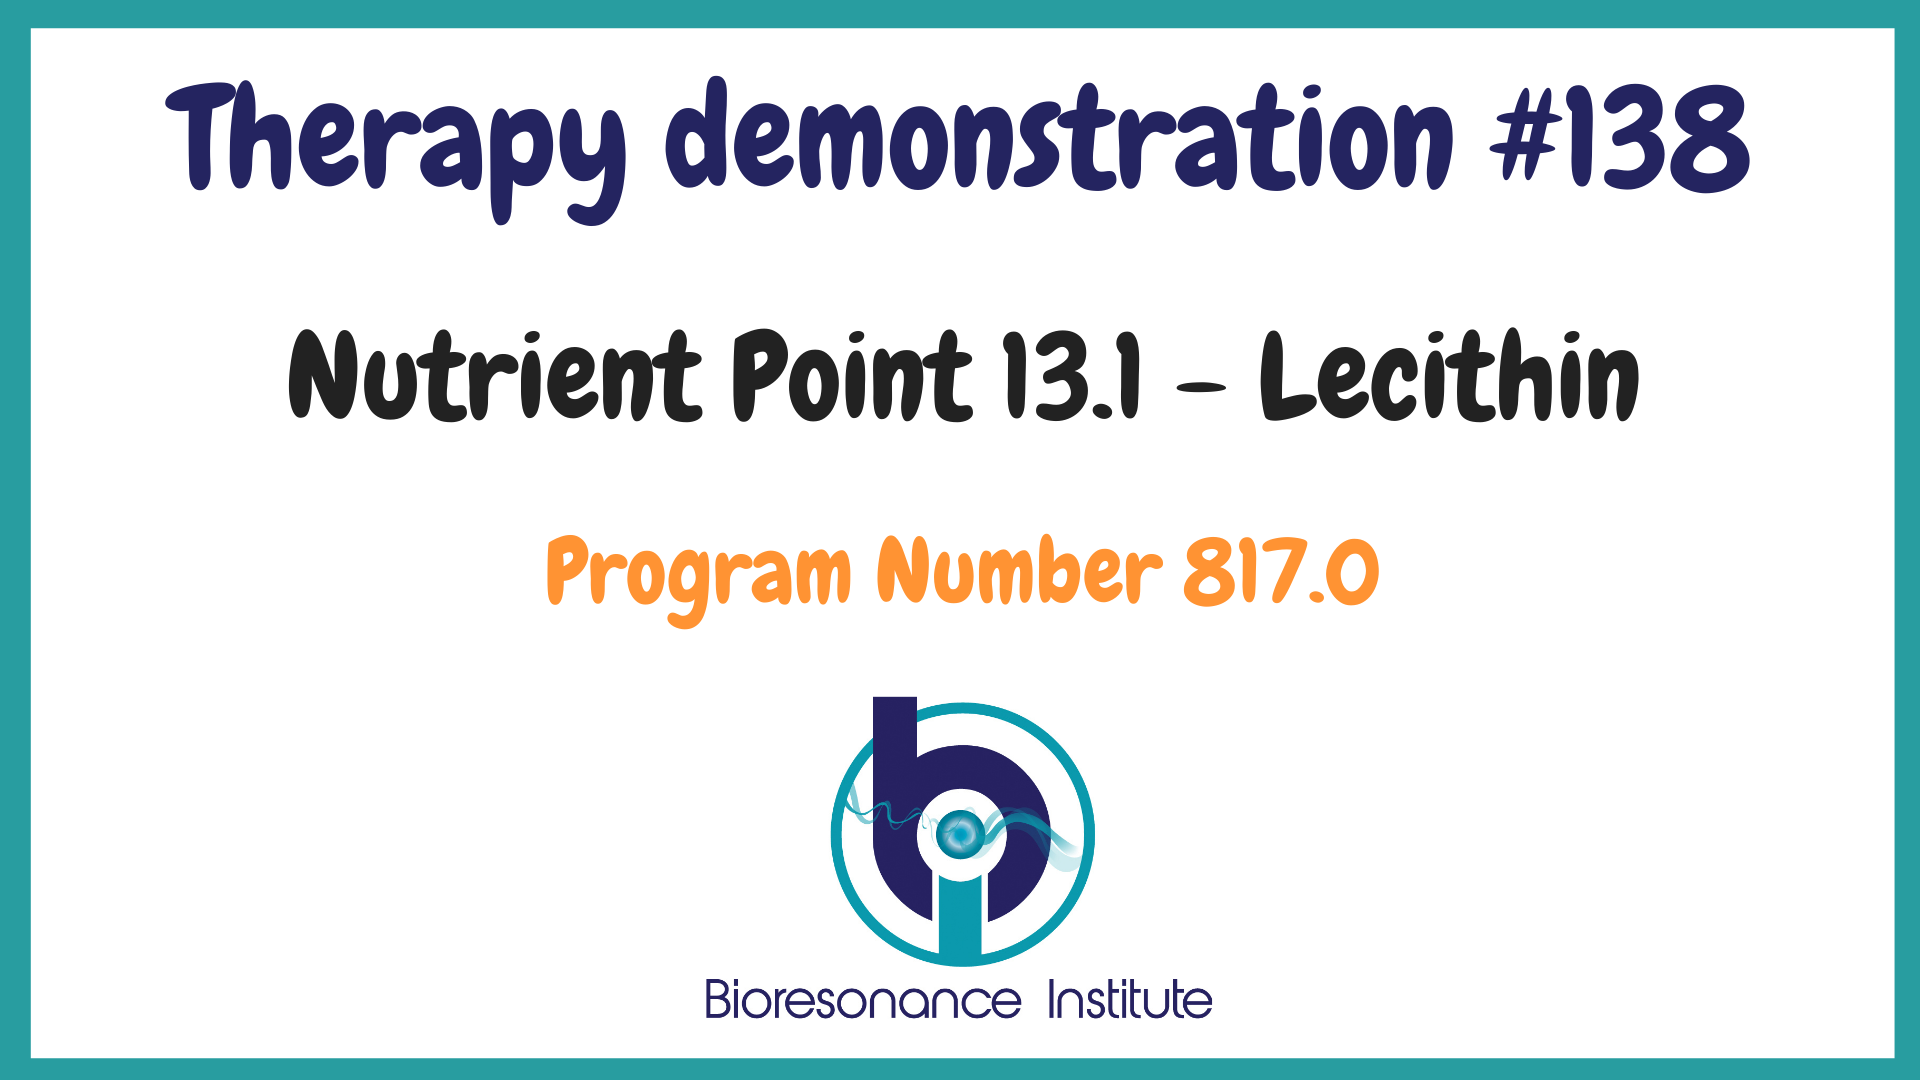 Nutrient point demonstration for Lecithin